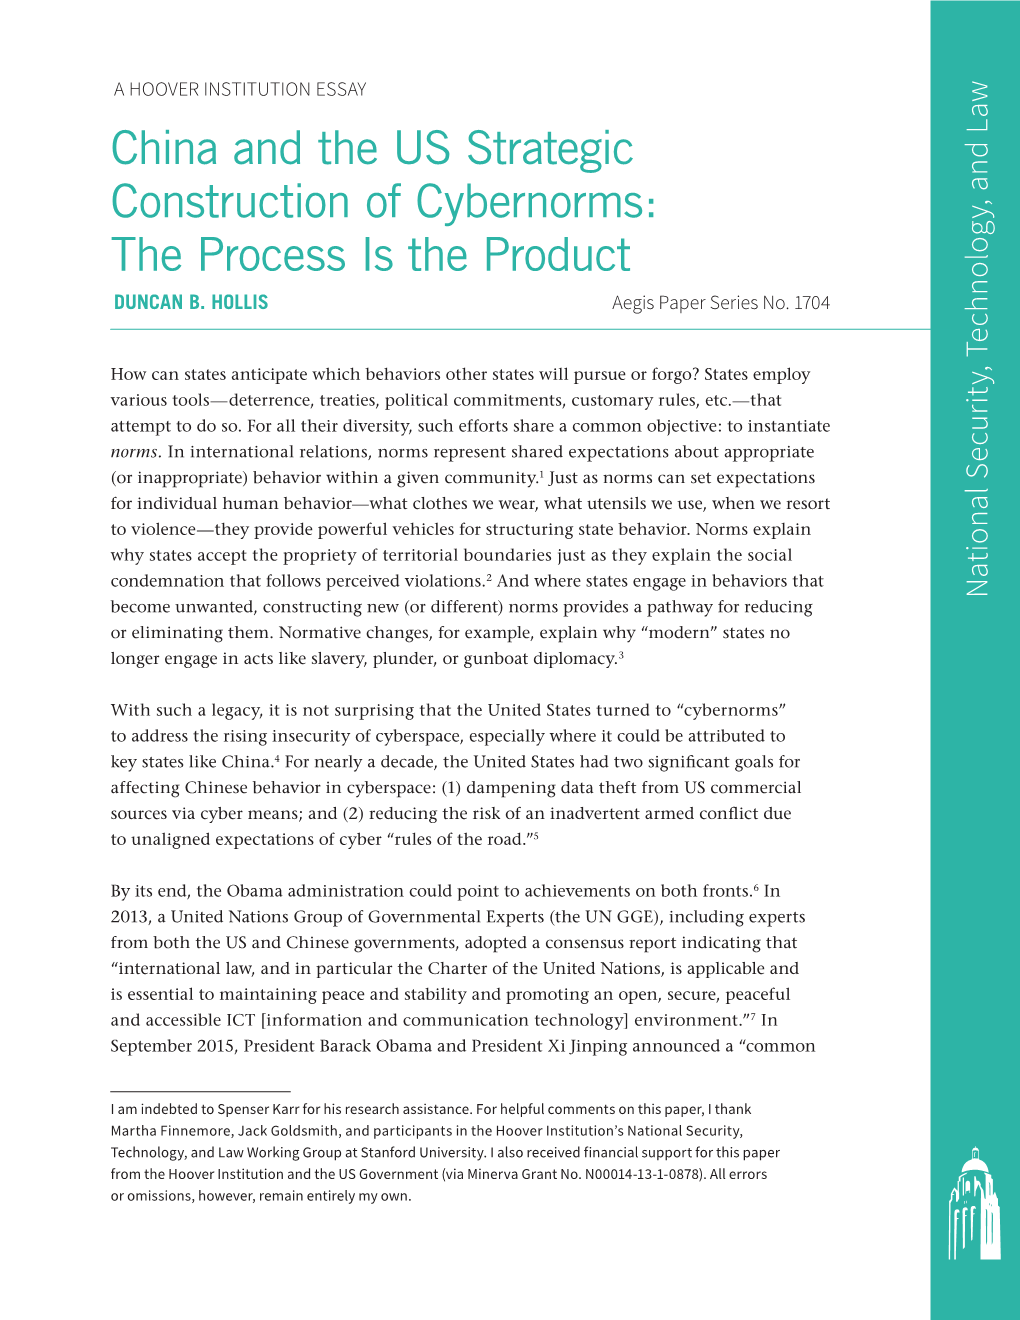 China and the US Strategic Construction of Cybernorms: the Process Is the Product 3